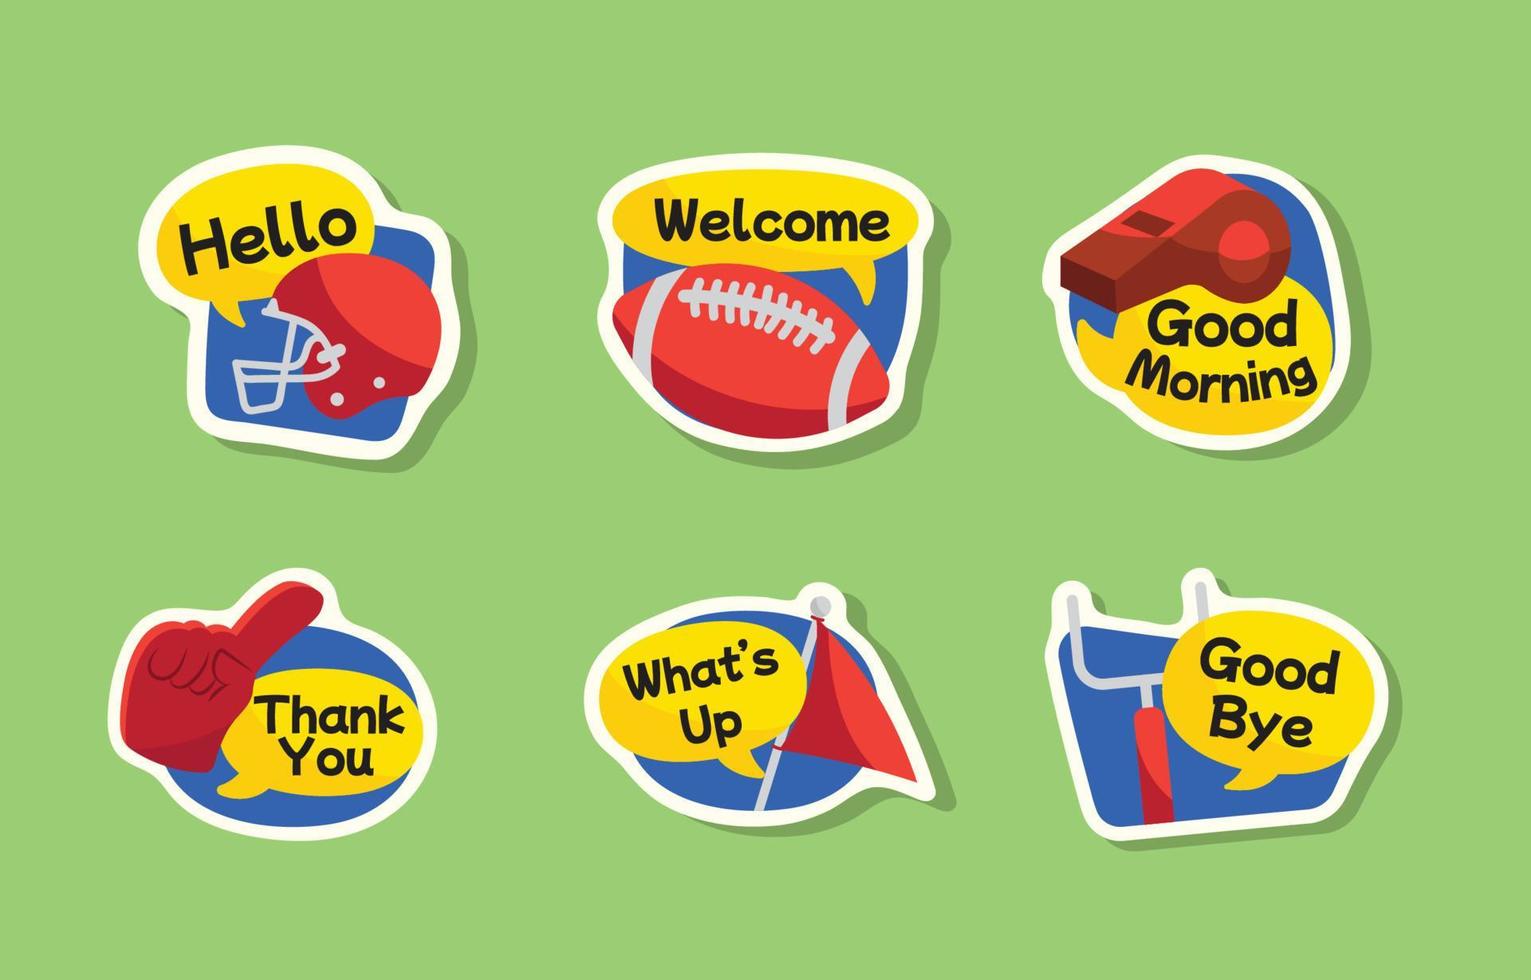 Superbowl Greeting Sticker Template Collection vector